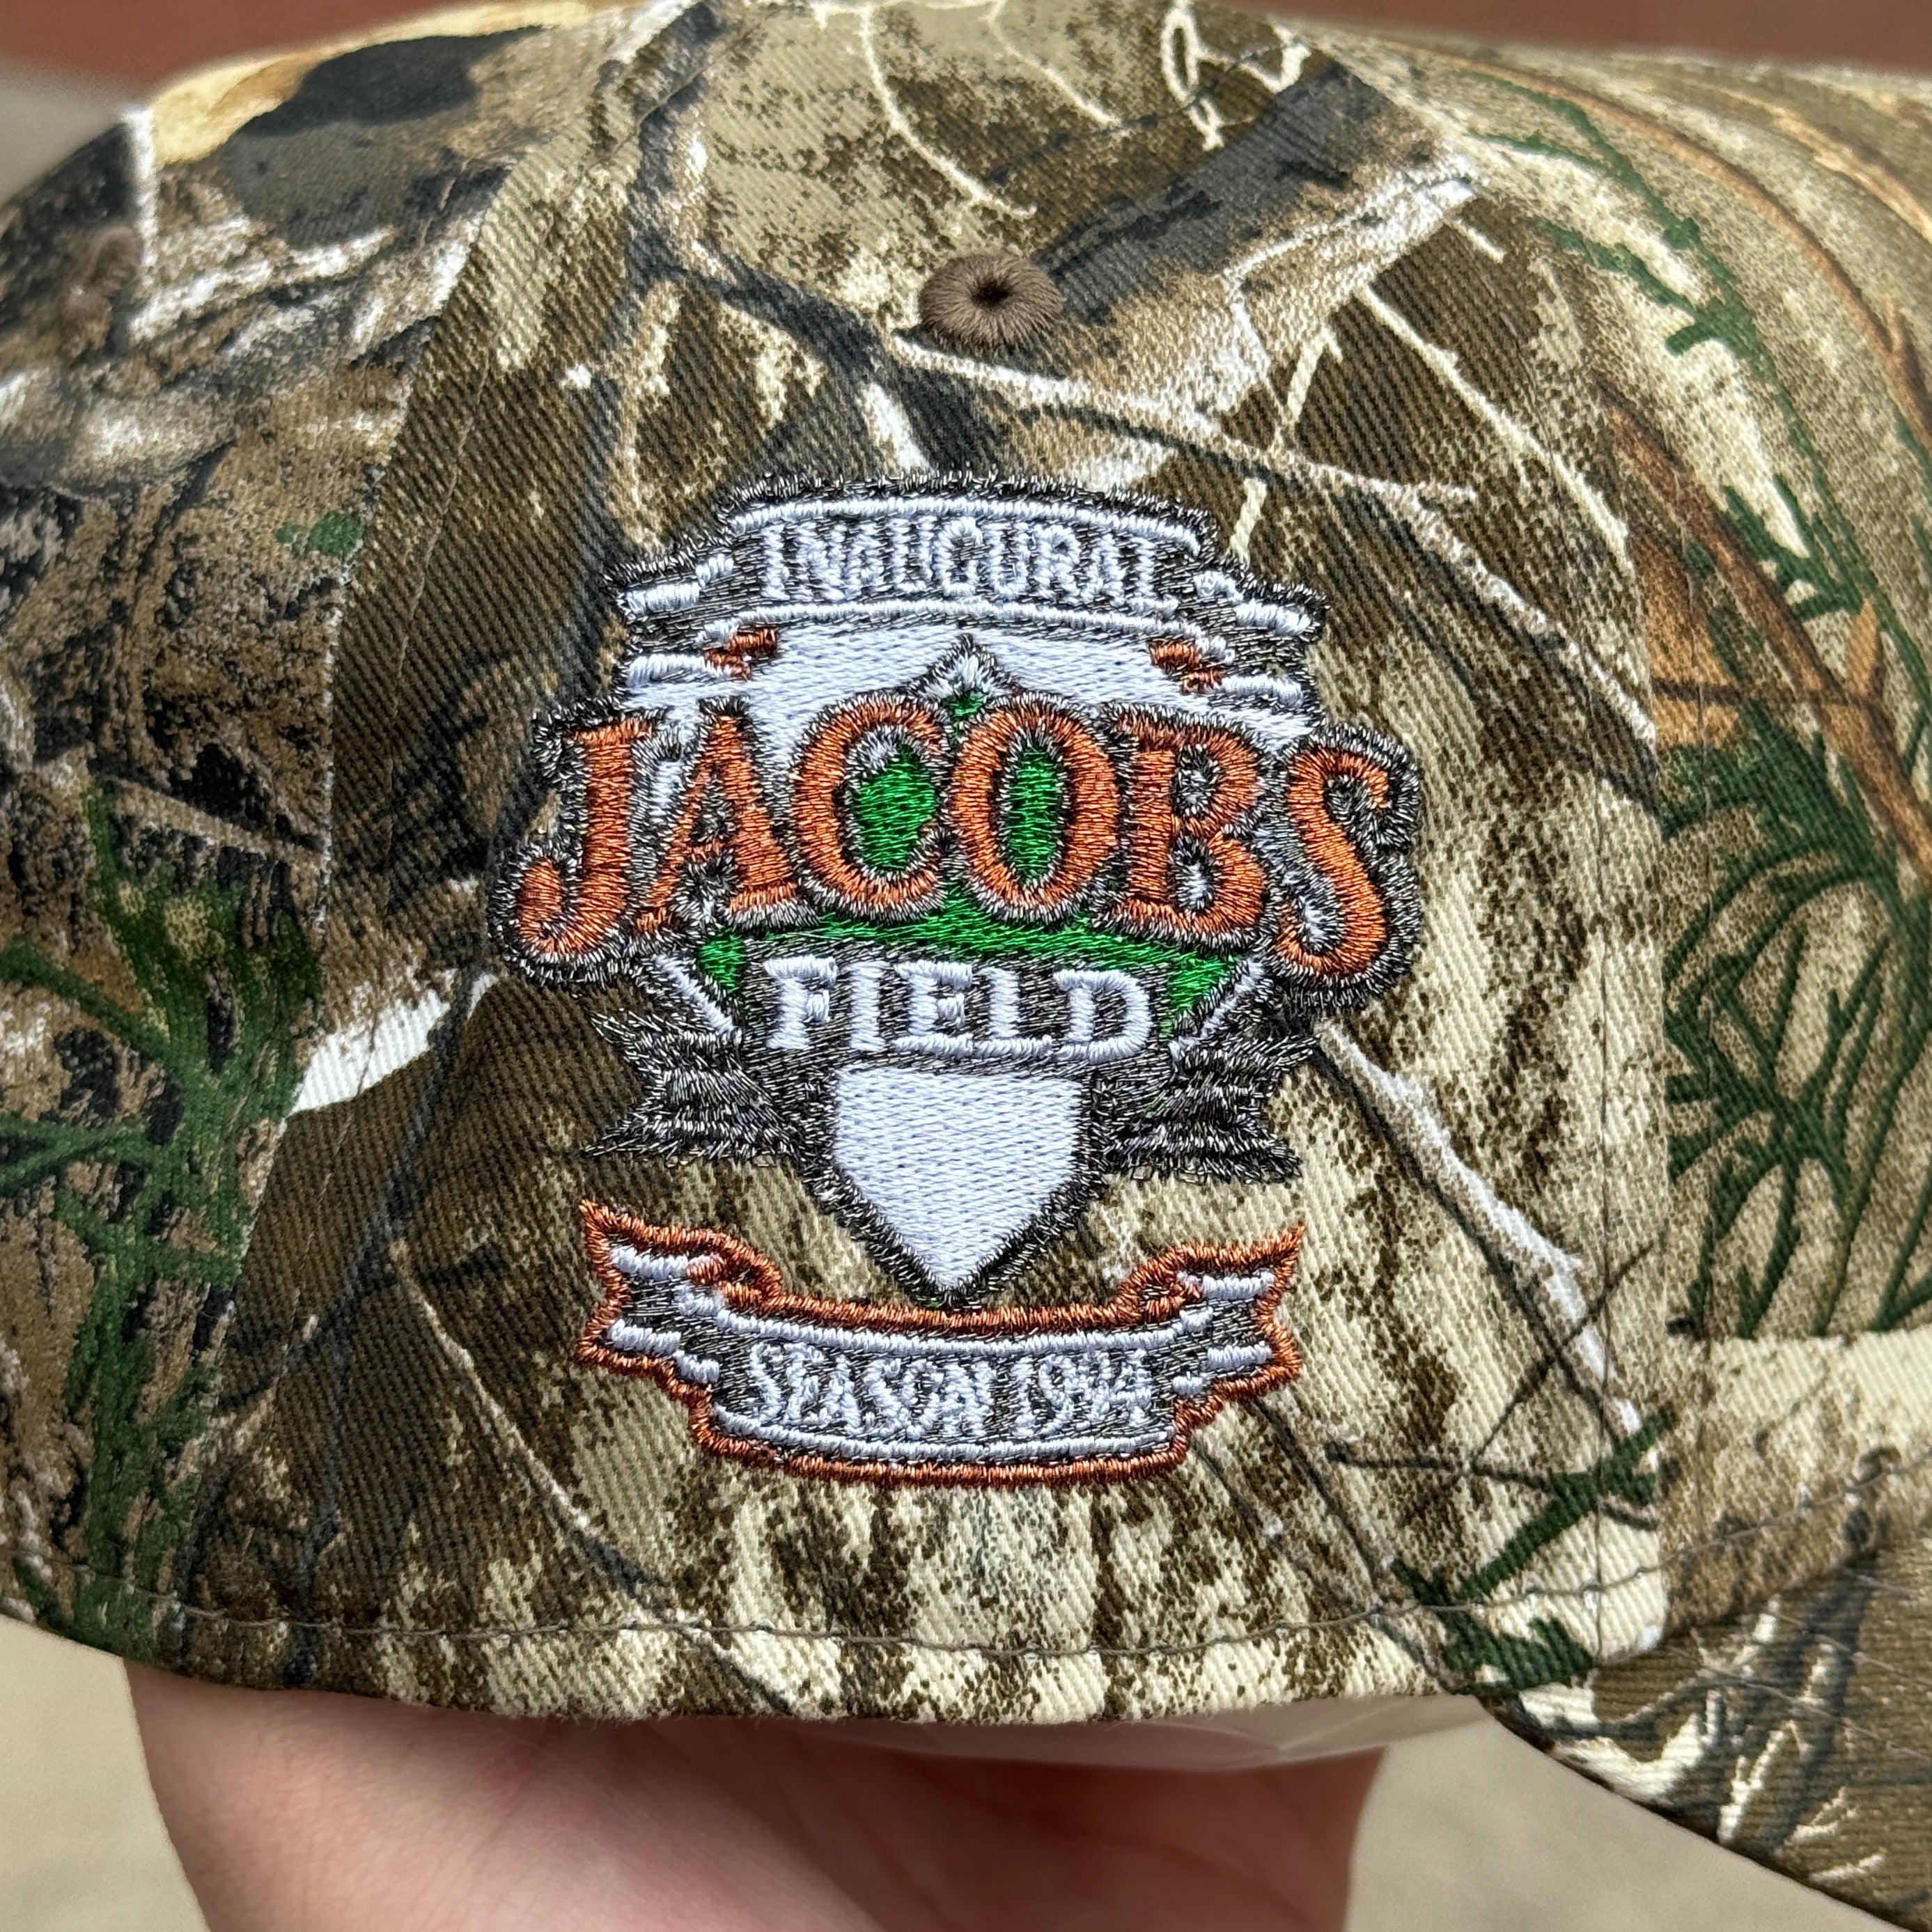 Realtree Camo Cleveland Indians Guardians Jacobs Field 9Forty Adjustable New Era